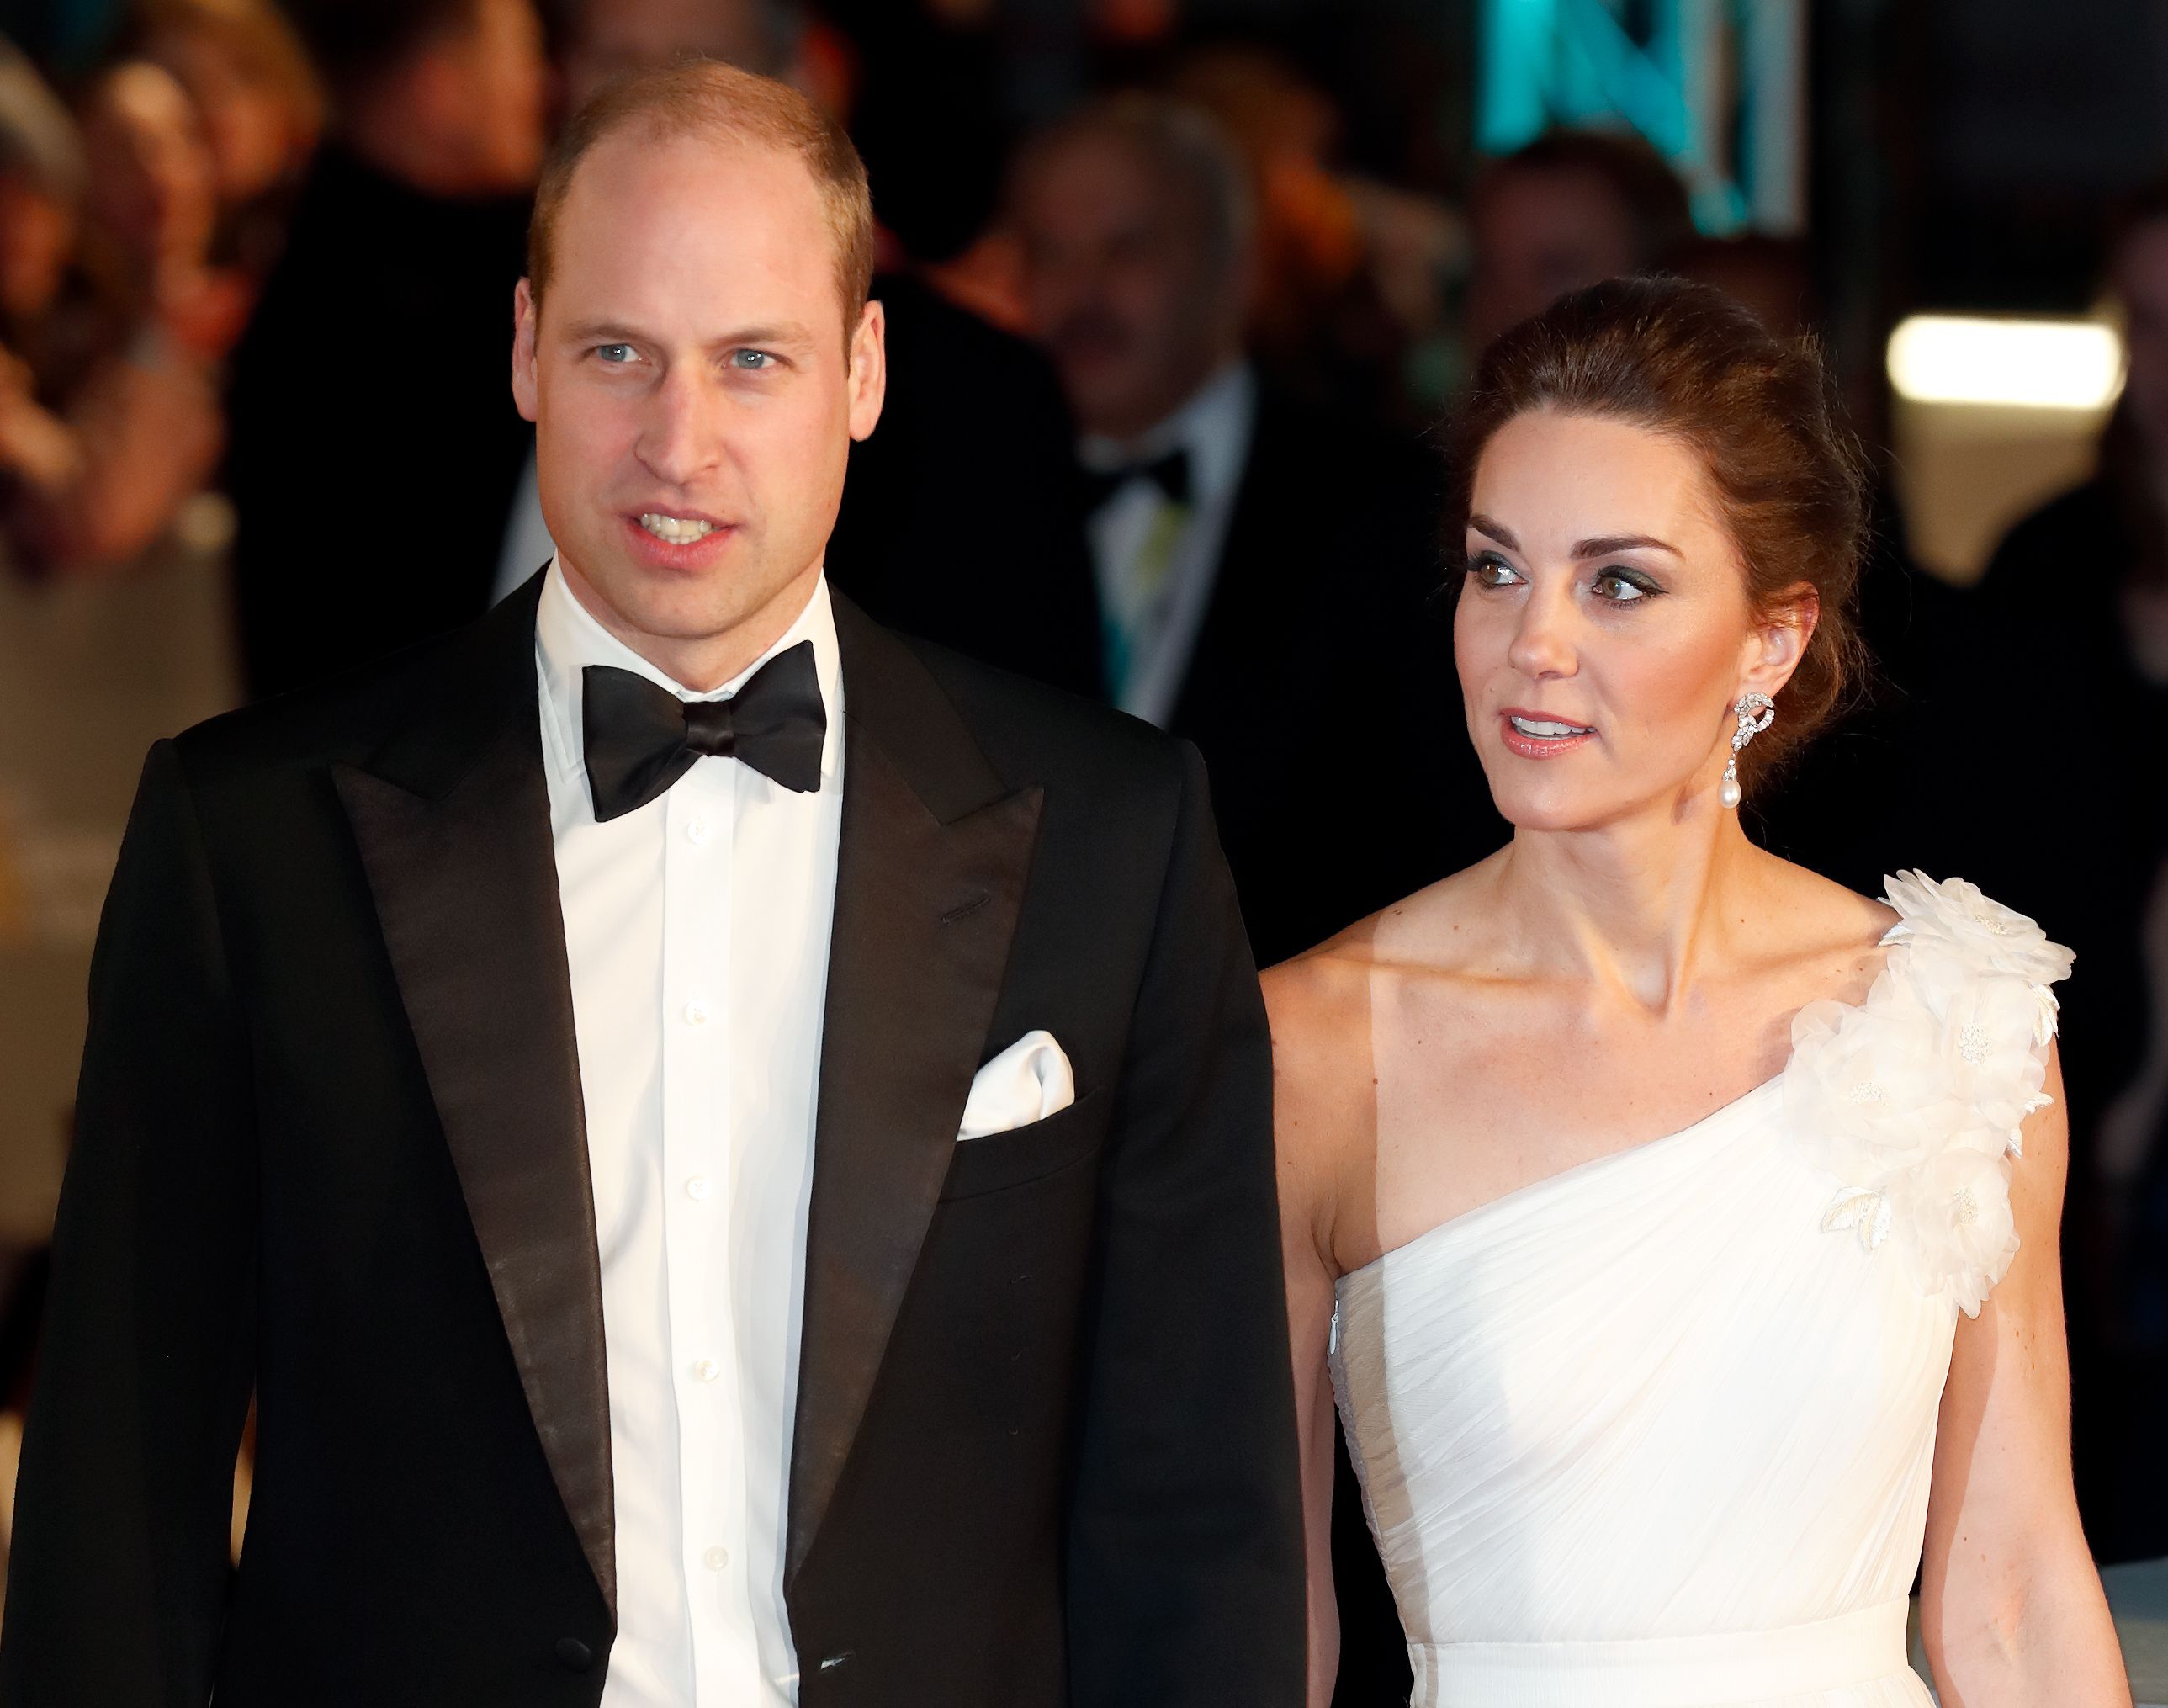 Prince William Makes Baby Joke Directed At Kate Middleton, As She Cooed Over A Baby Girl